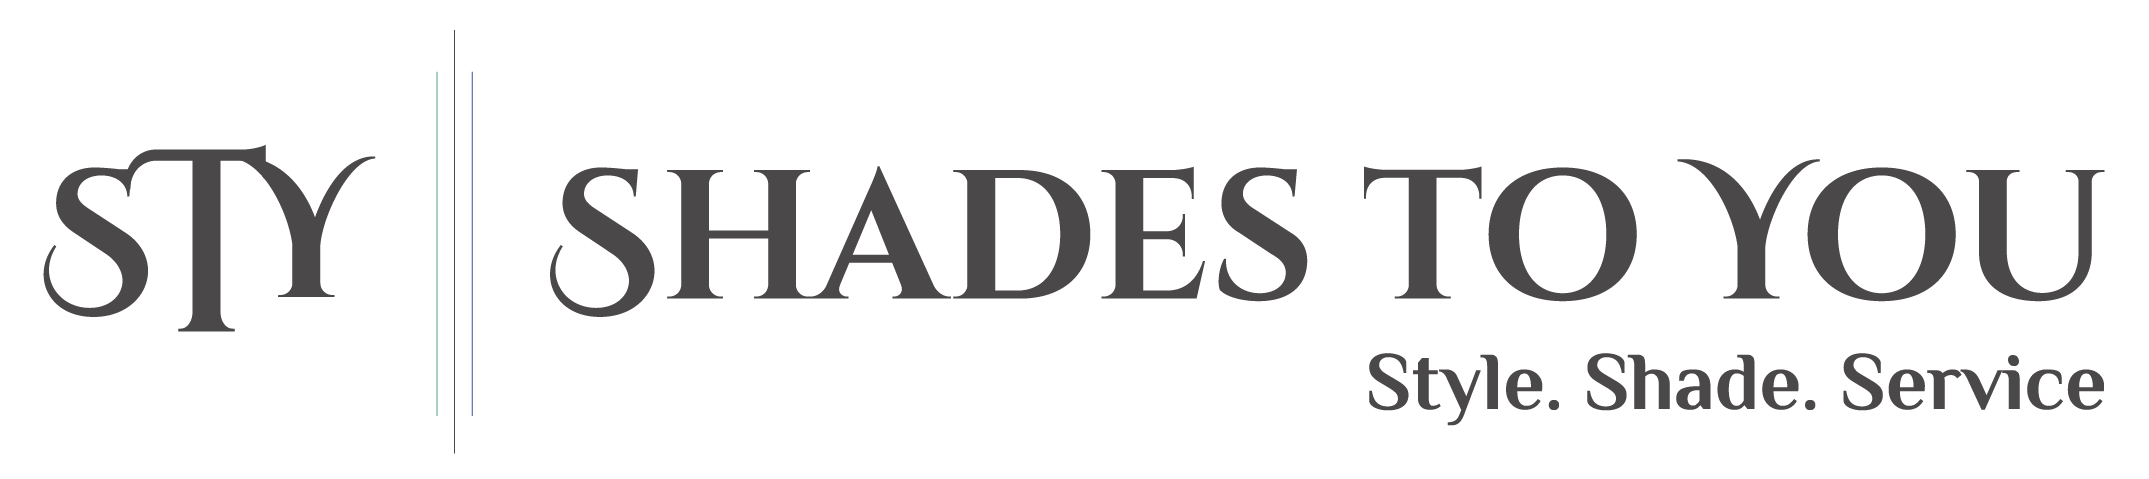 Shades To You Logo